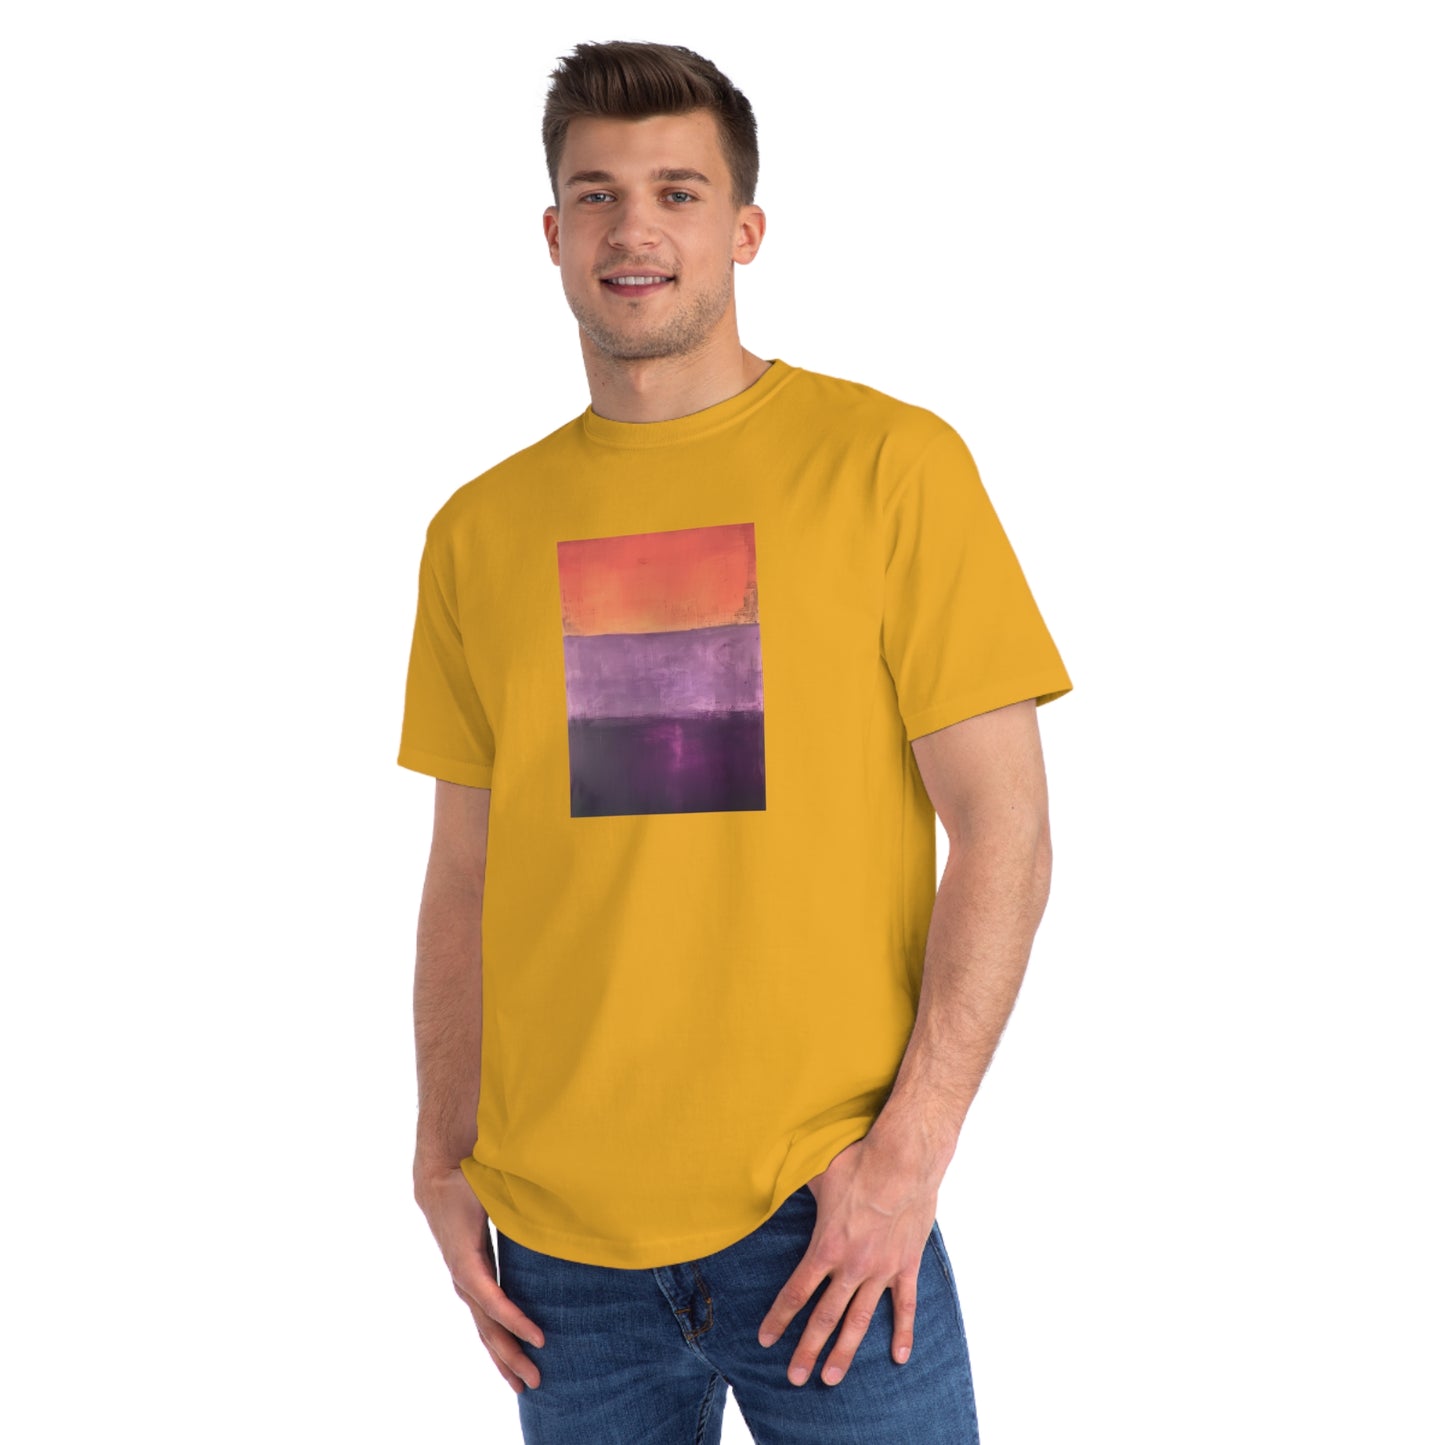 a man wearing a yellow t - shirt with a picture of a sunset